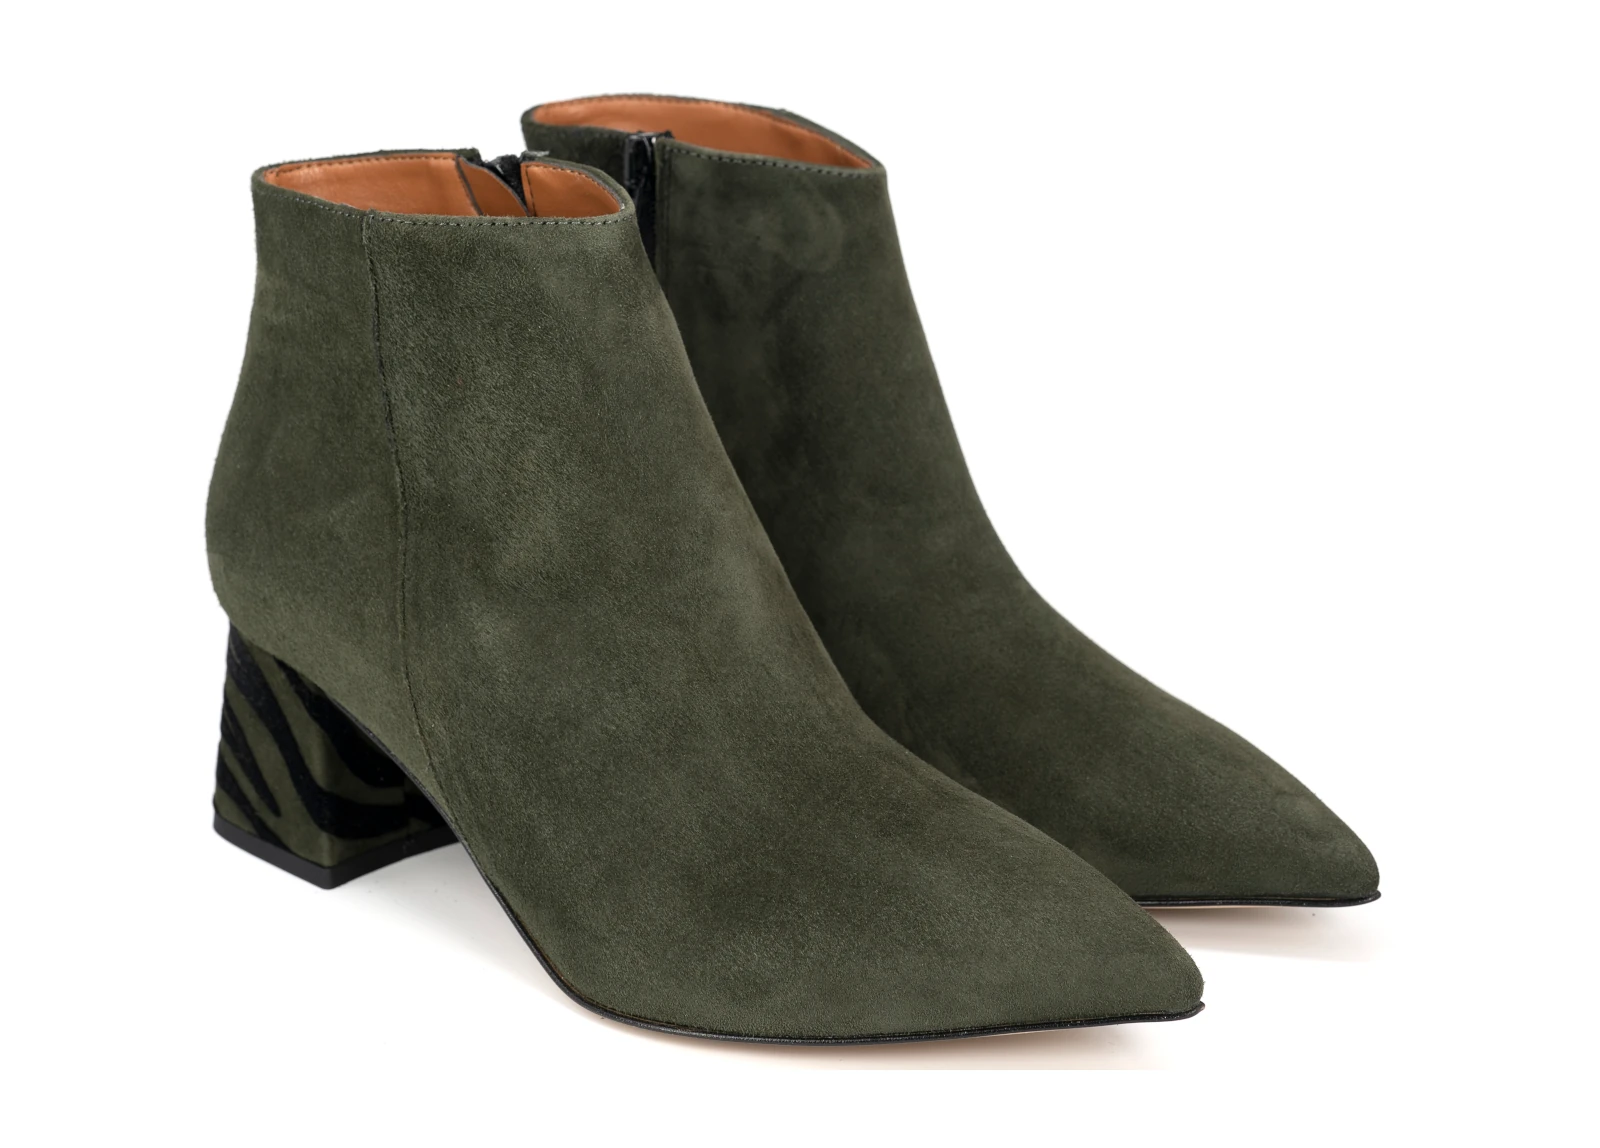 Woman Ankle Boot in Green Suede Leather, Zebra Heel.